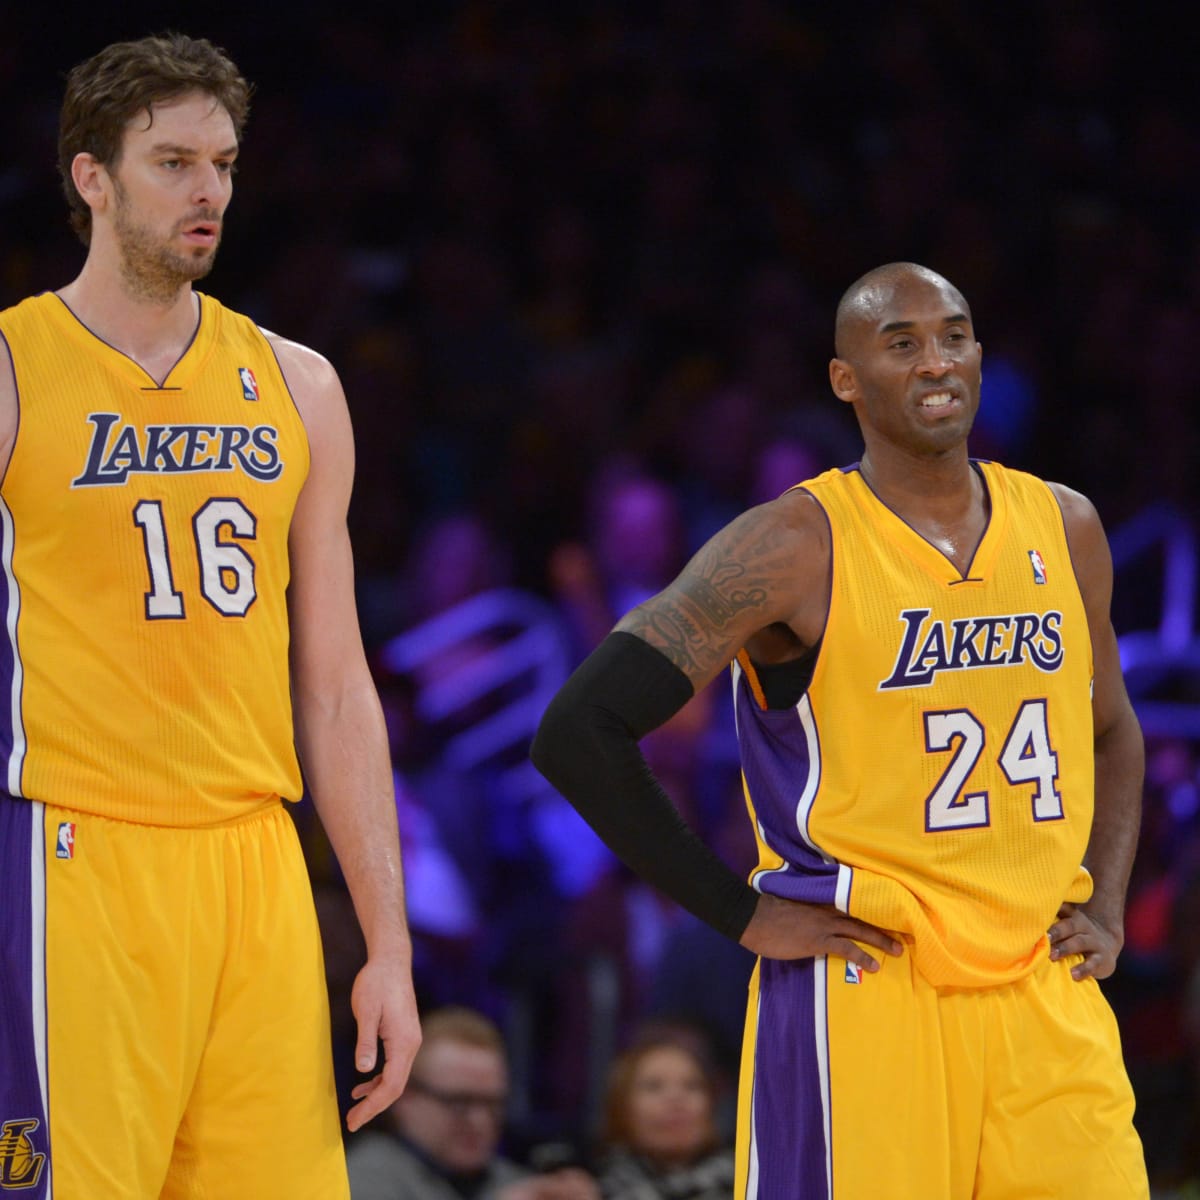 Lakers News: Pau Gasol Previews Jersey Retirement Ceremony Without